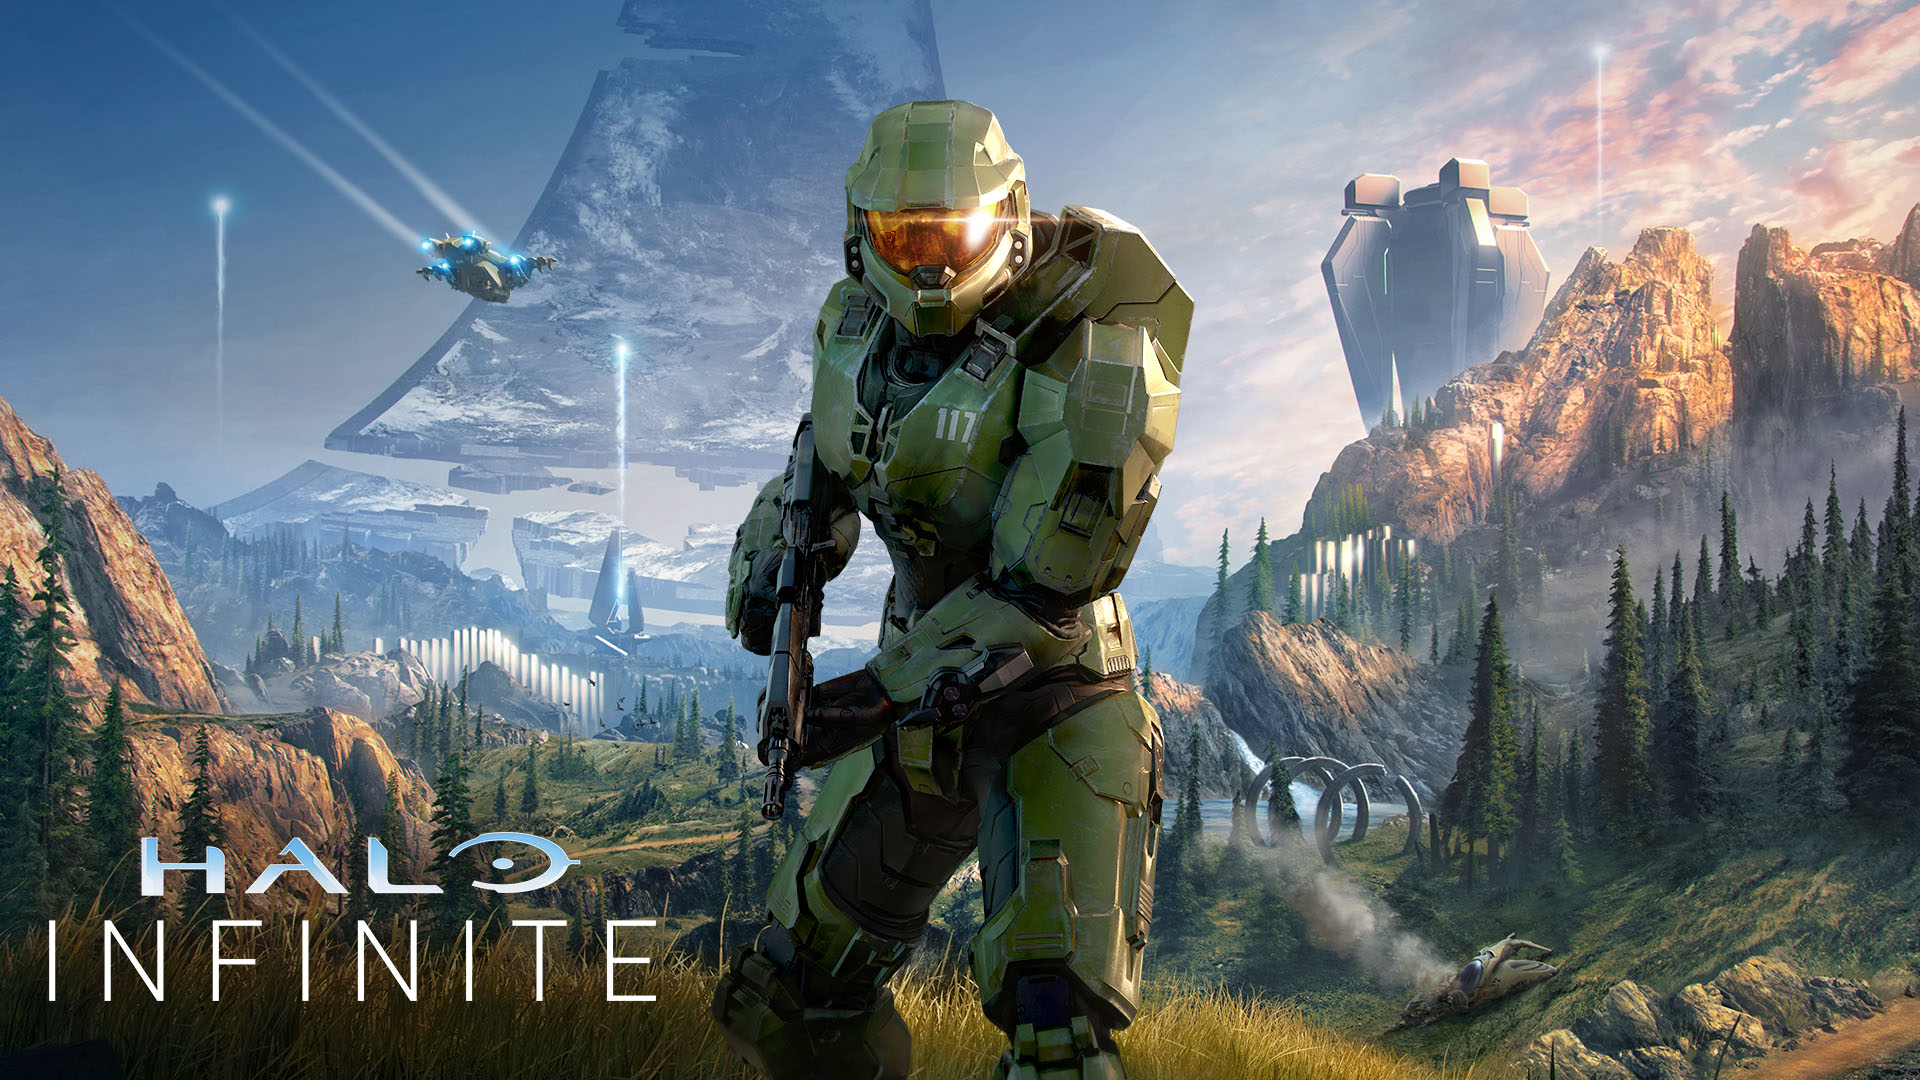 Halo for tomorrow's showcase by downloading #HaloInfinite wallpaper and social media banners today!